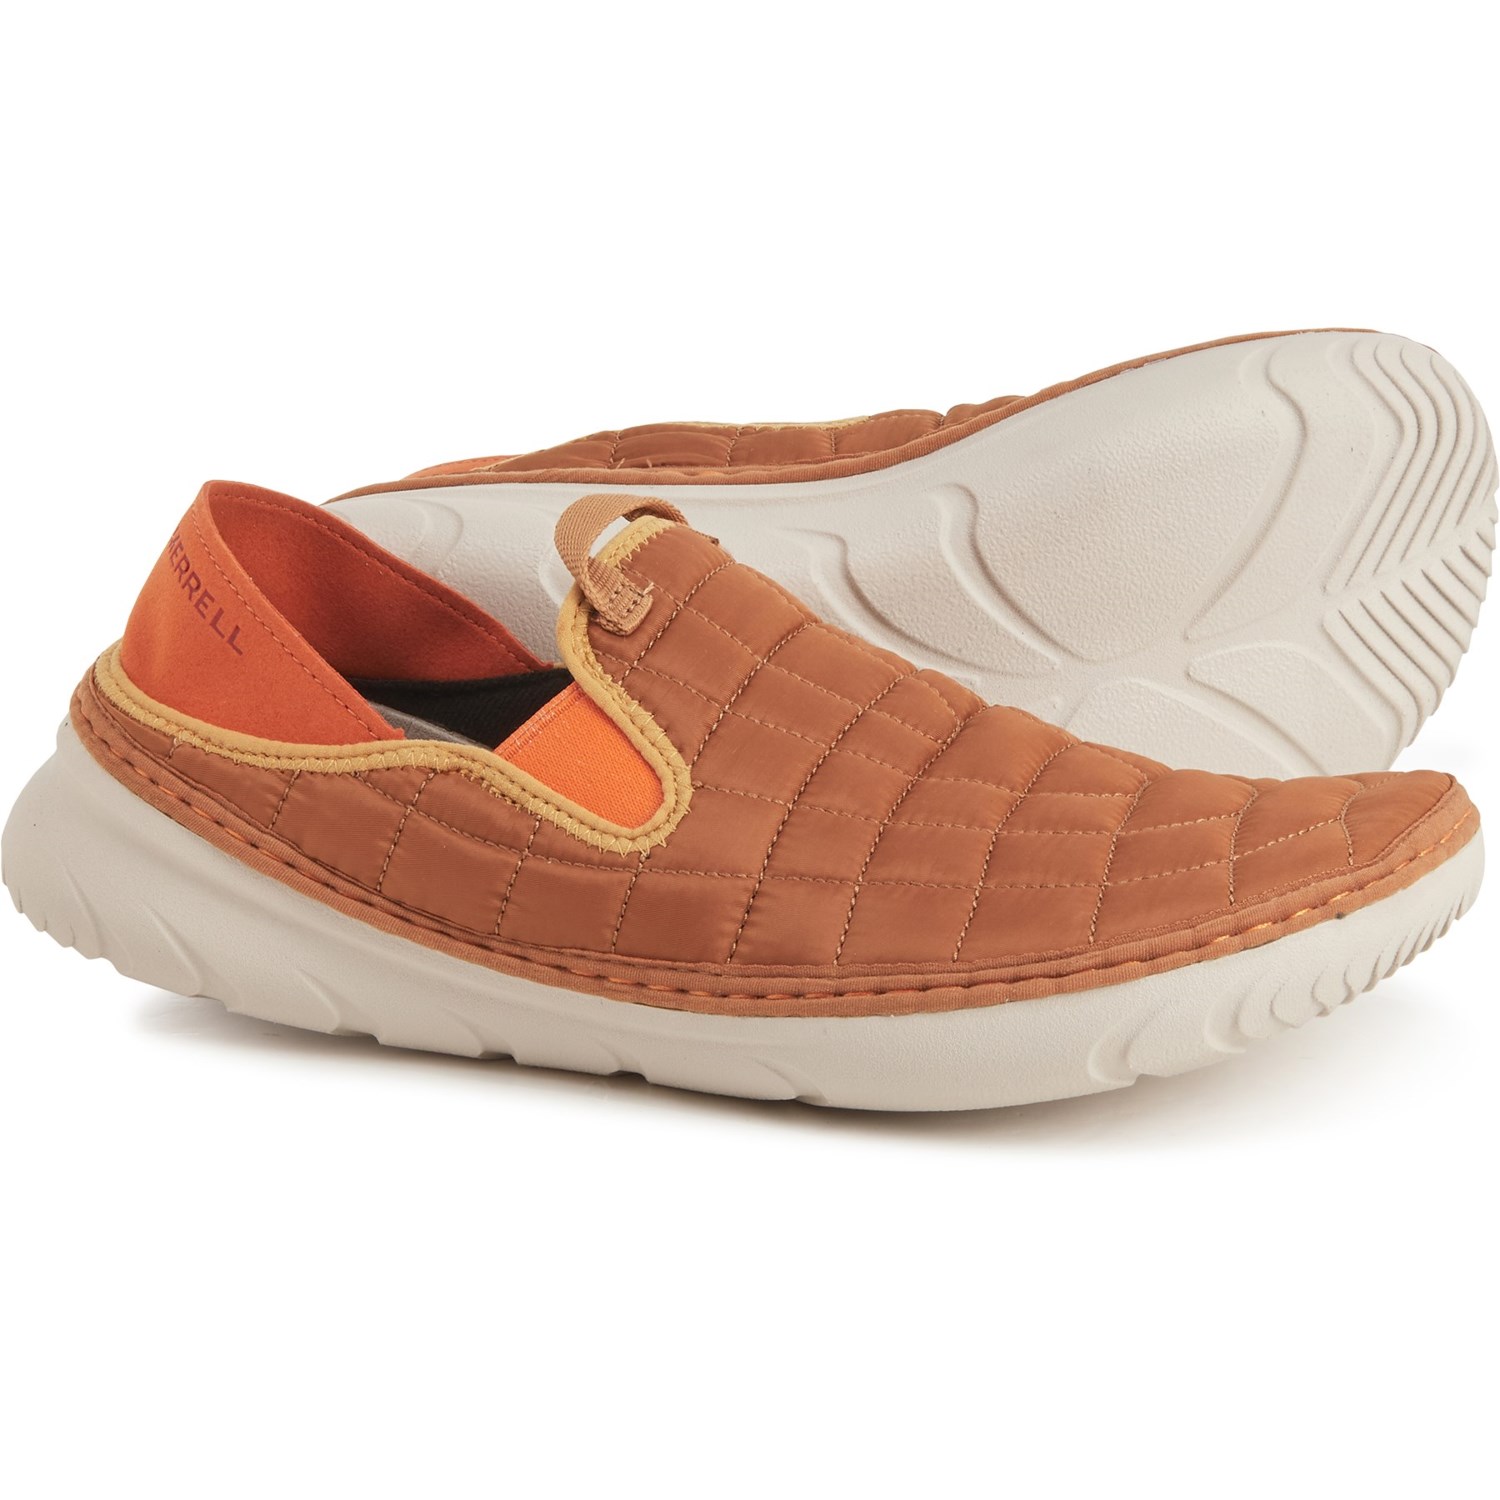 Merrell Hut Moc Quilted Shoes - Slip-Ons (For Men)